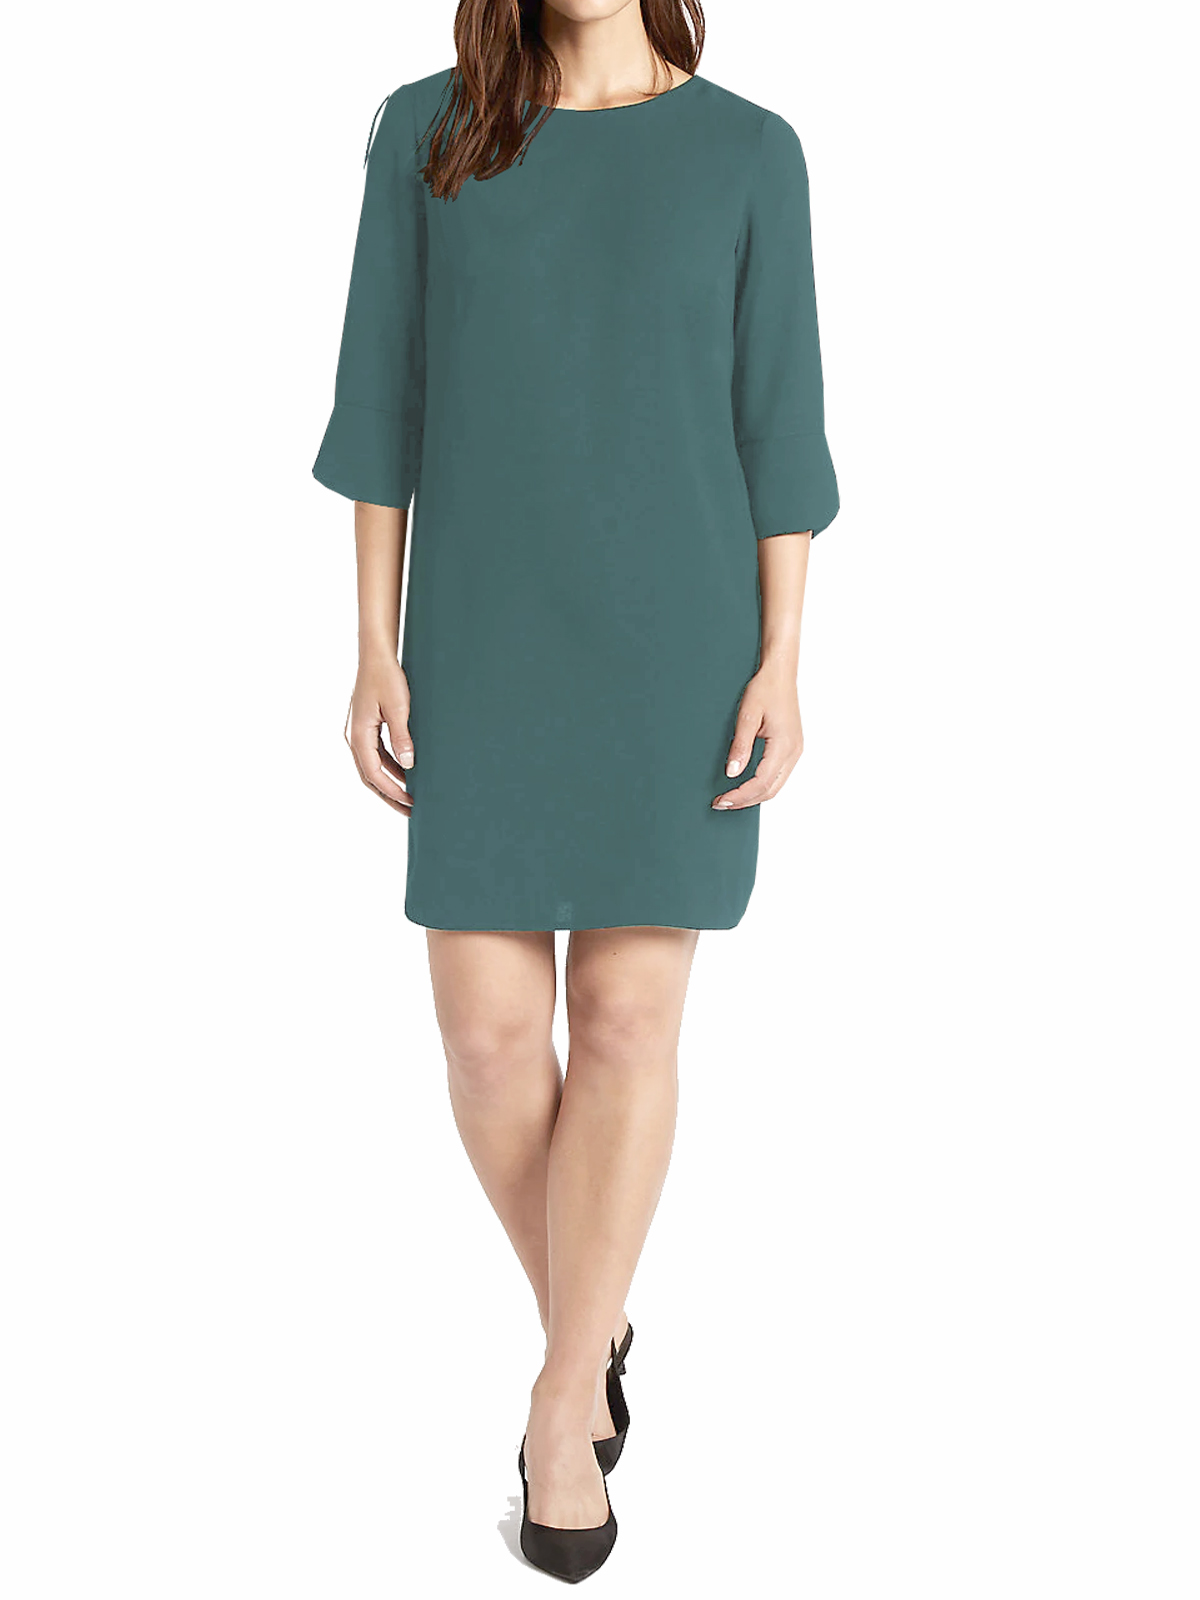 Marks and Spencer - - M&5 PETROL Split Sleeve Shift Dress - Size 6 to ...